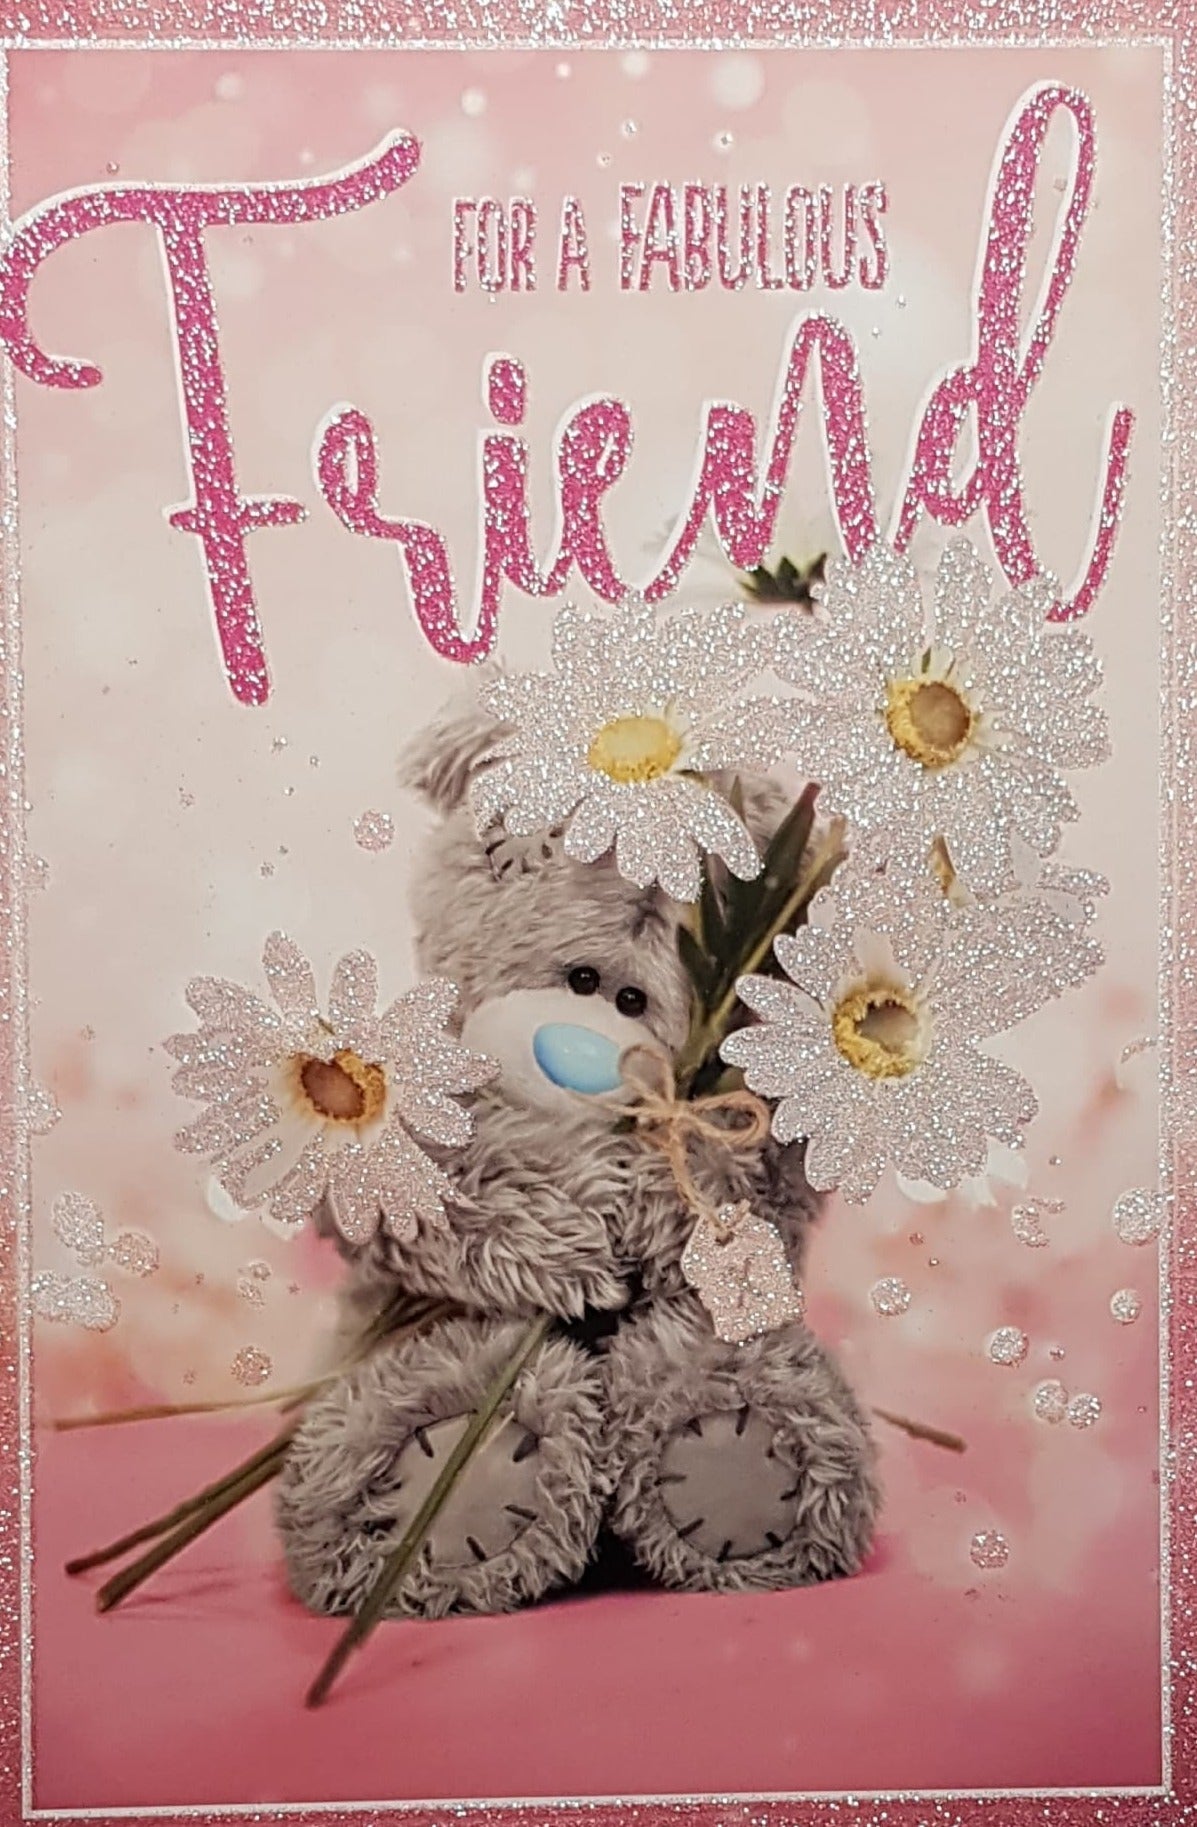 Birthday Card - Friend / Teddy Holding Giant Daisies & A Pink Sparkly Font